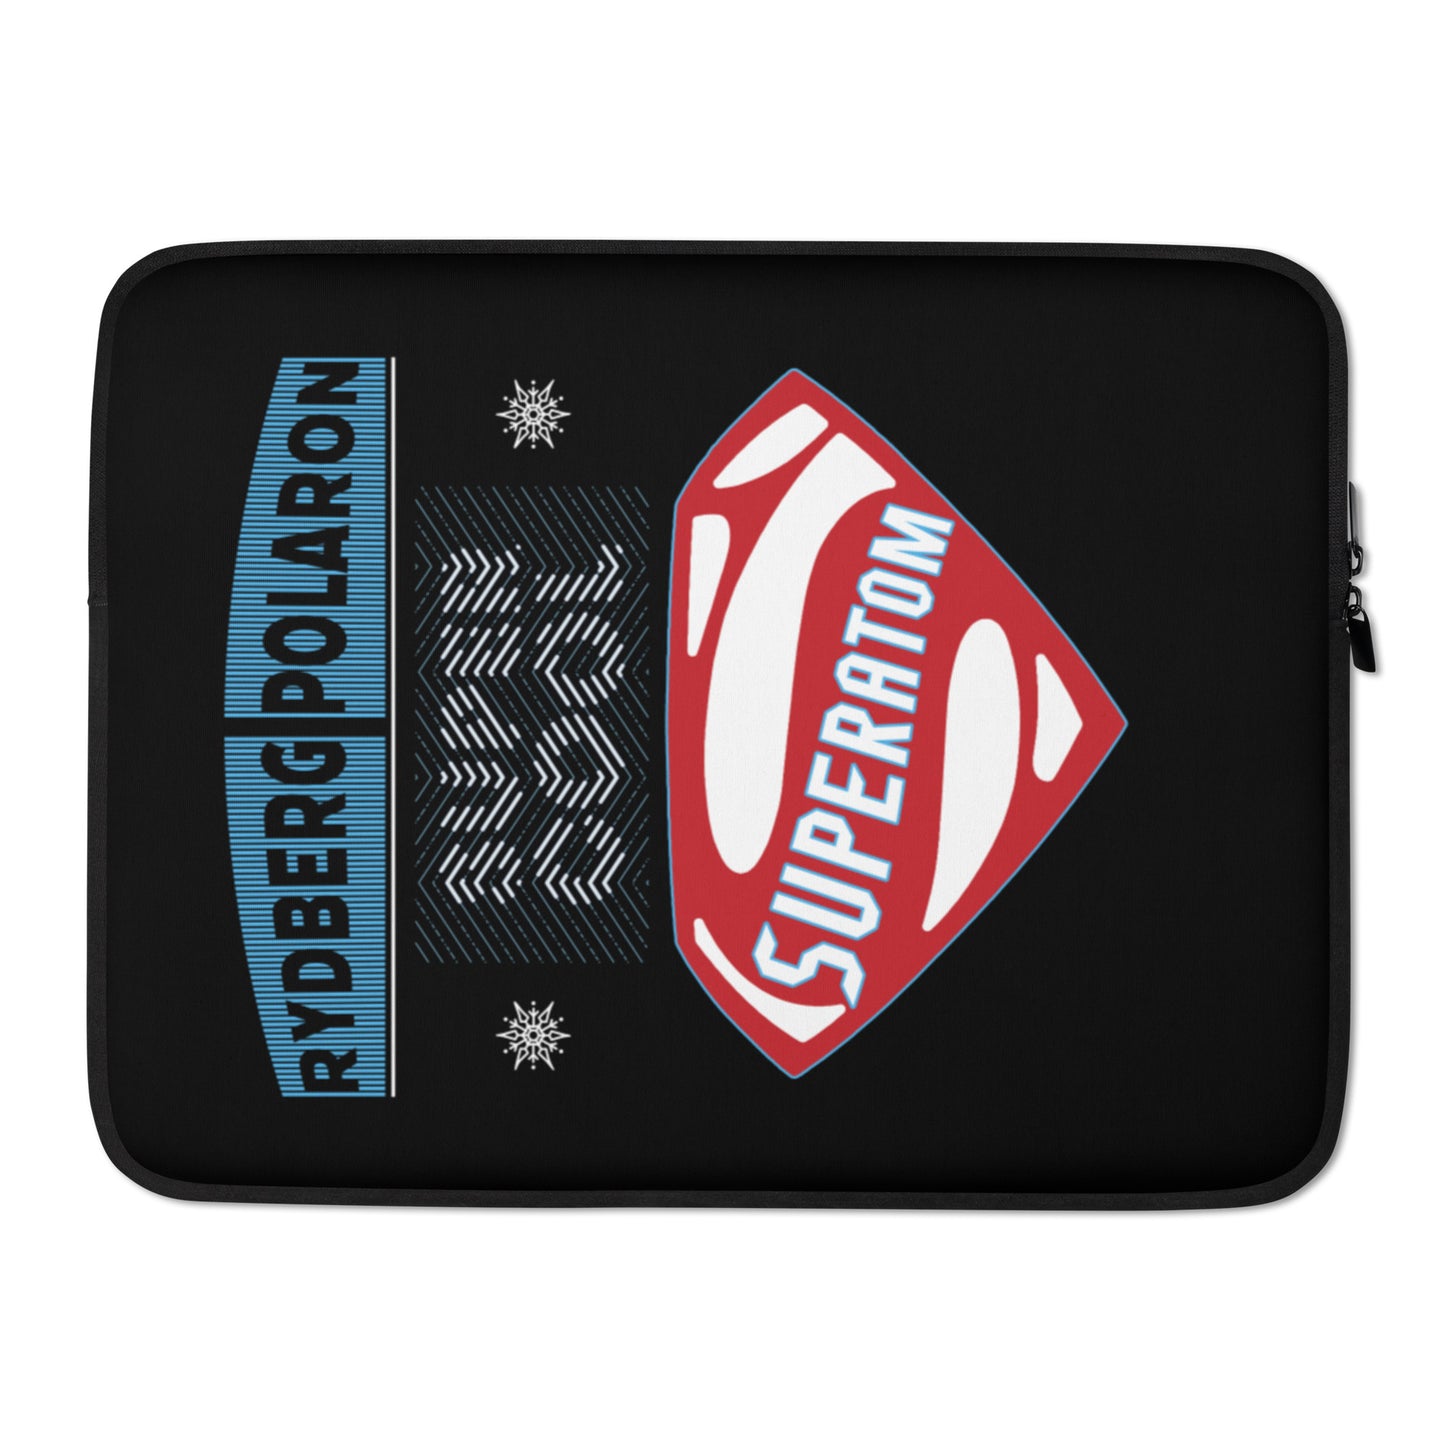 Laptop Sleeve: SUPERATOM! A cooler name for a Rydberg Polaron says Paul Sutter